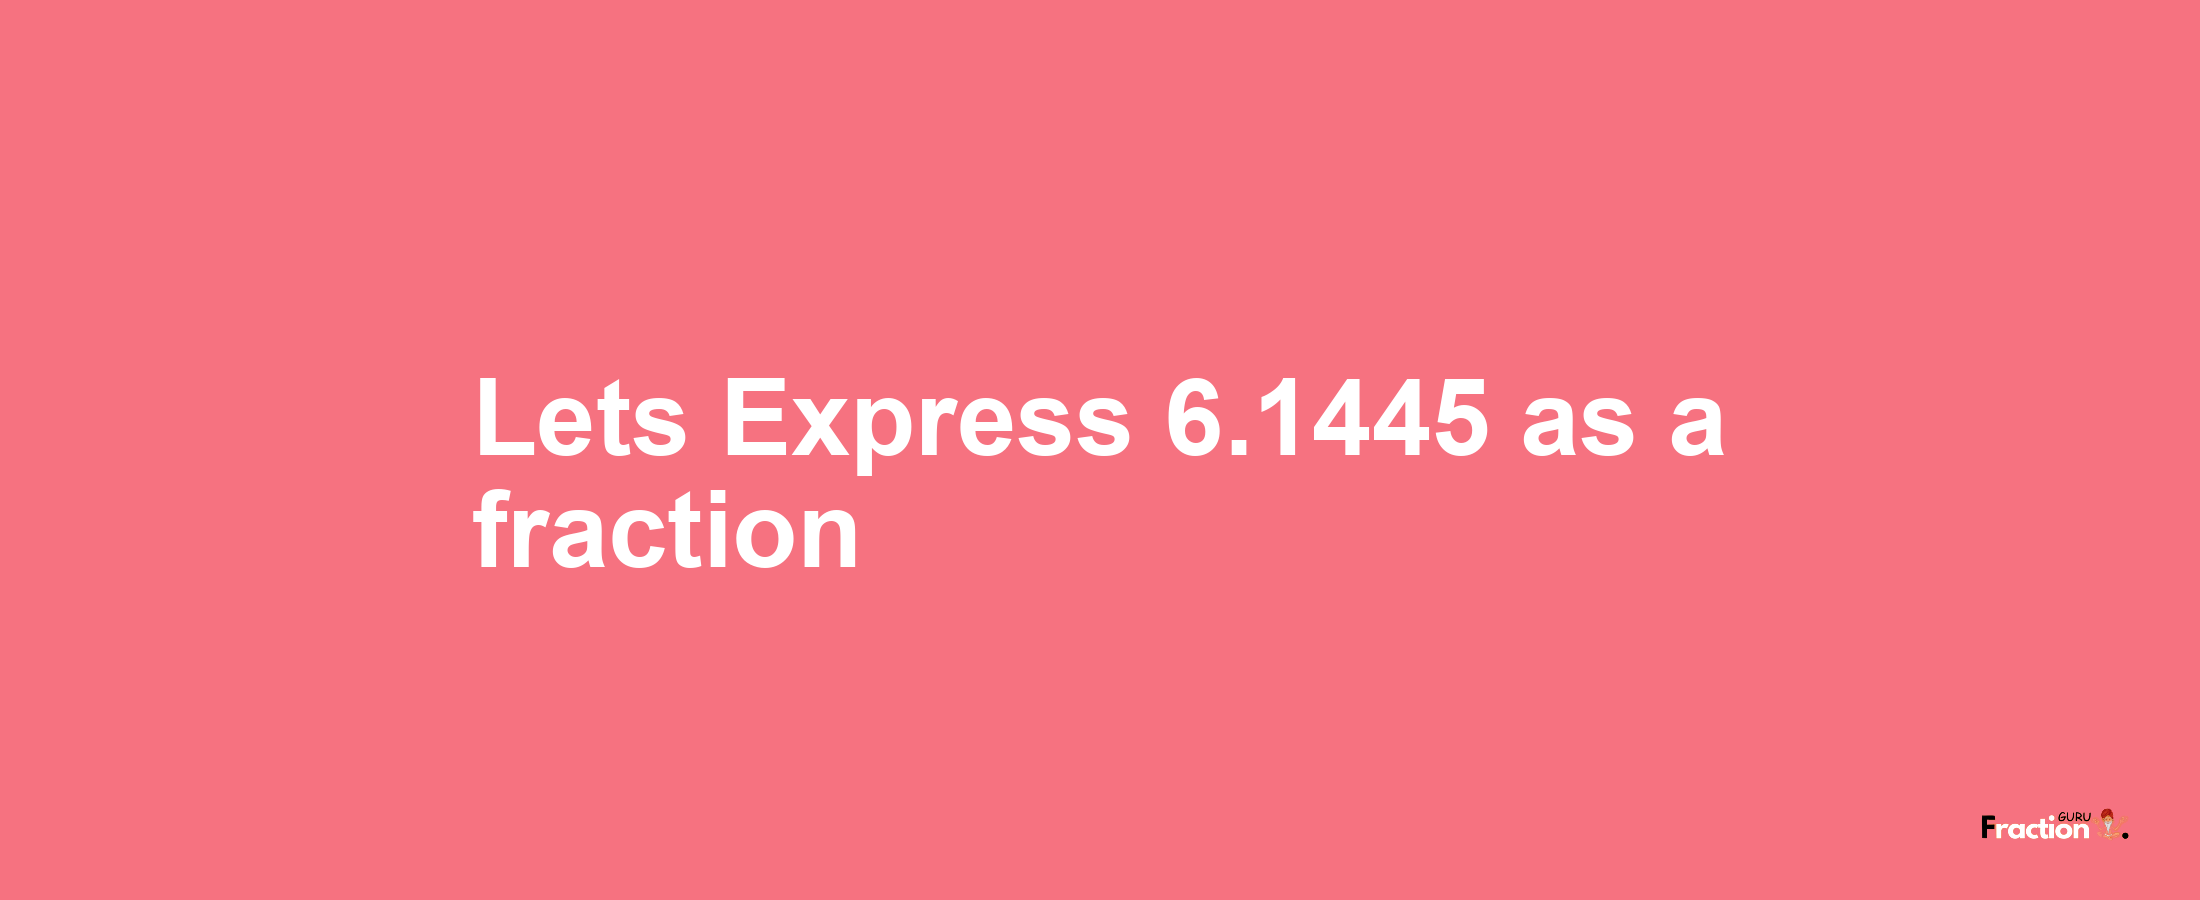 Lets Express 6.1445 as afraction